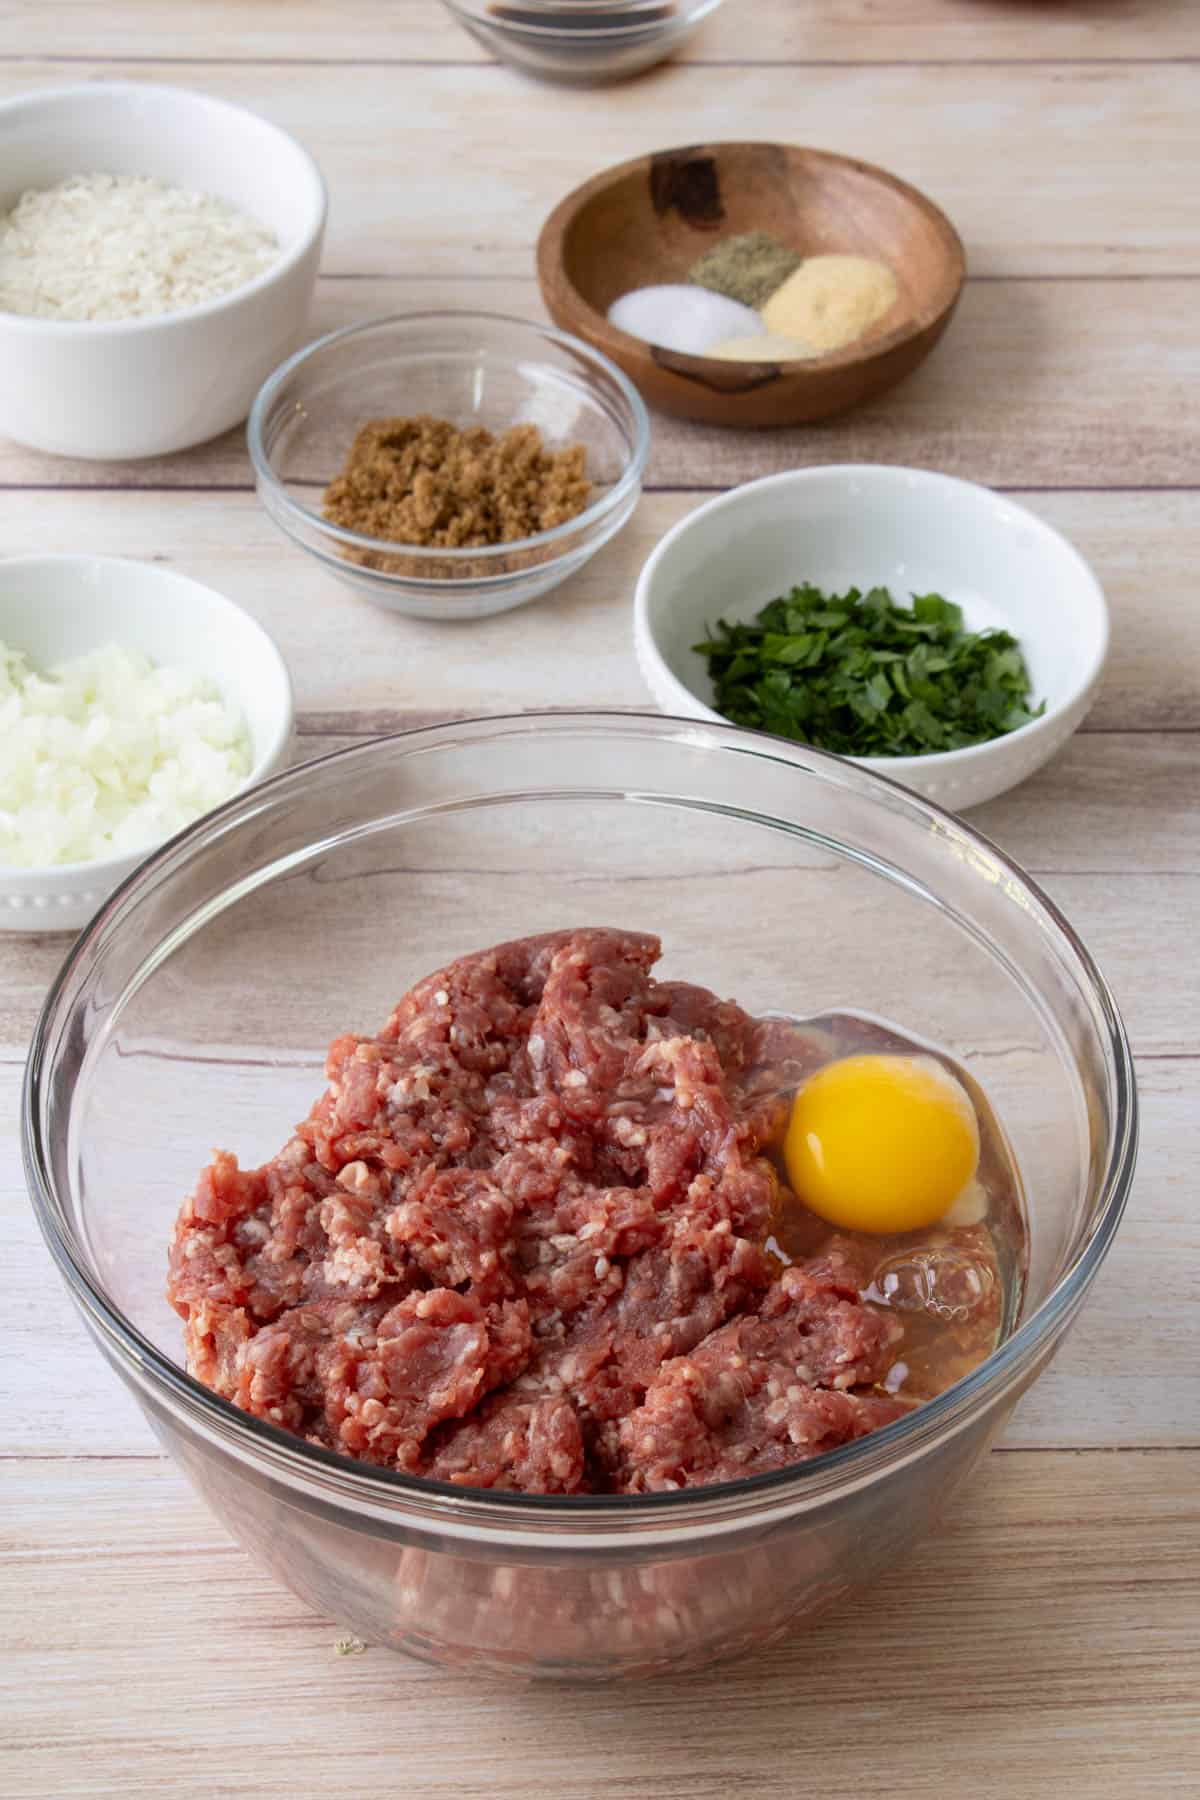 Combining an egg and ground beef in a bowl.